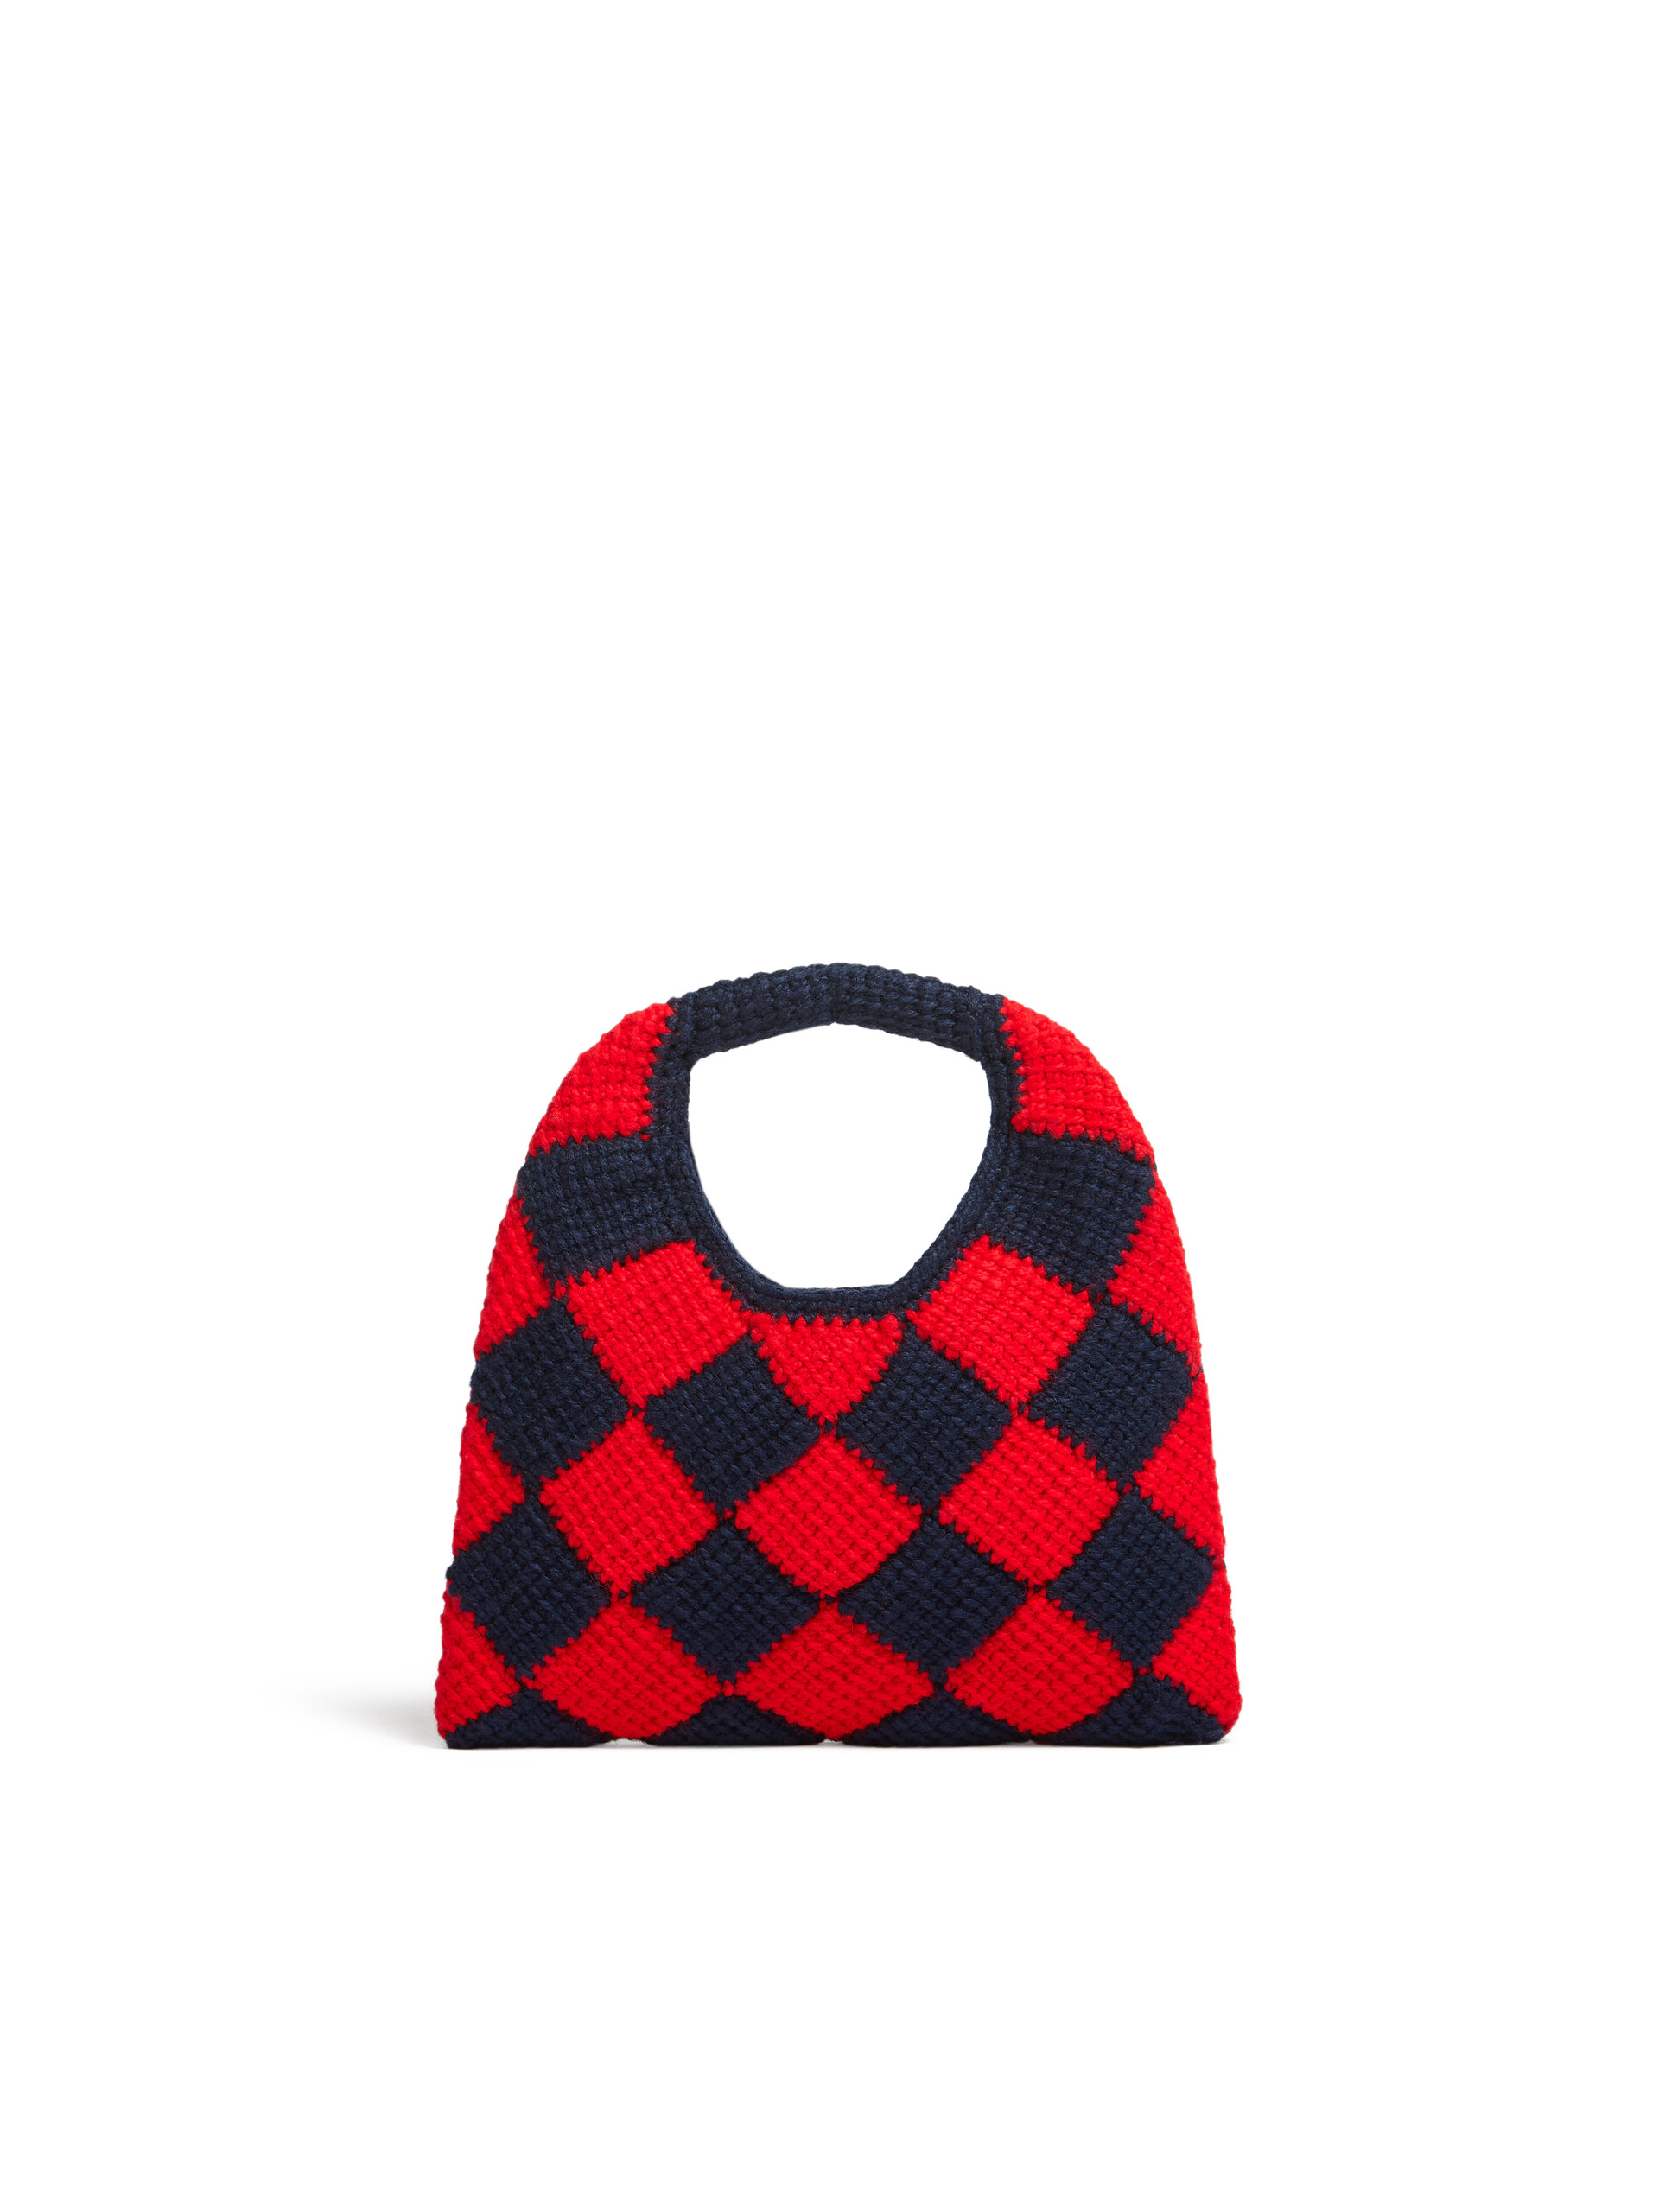 Small blue and red technical wool MARNI MARKET bag - Bags - Image 3